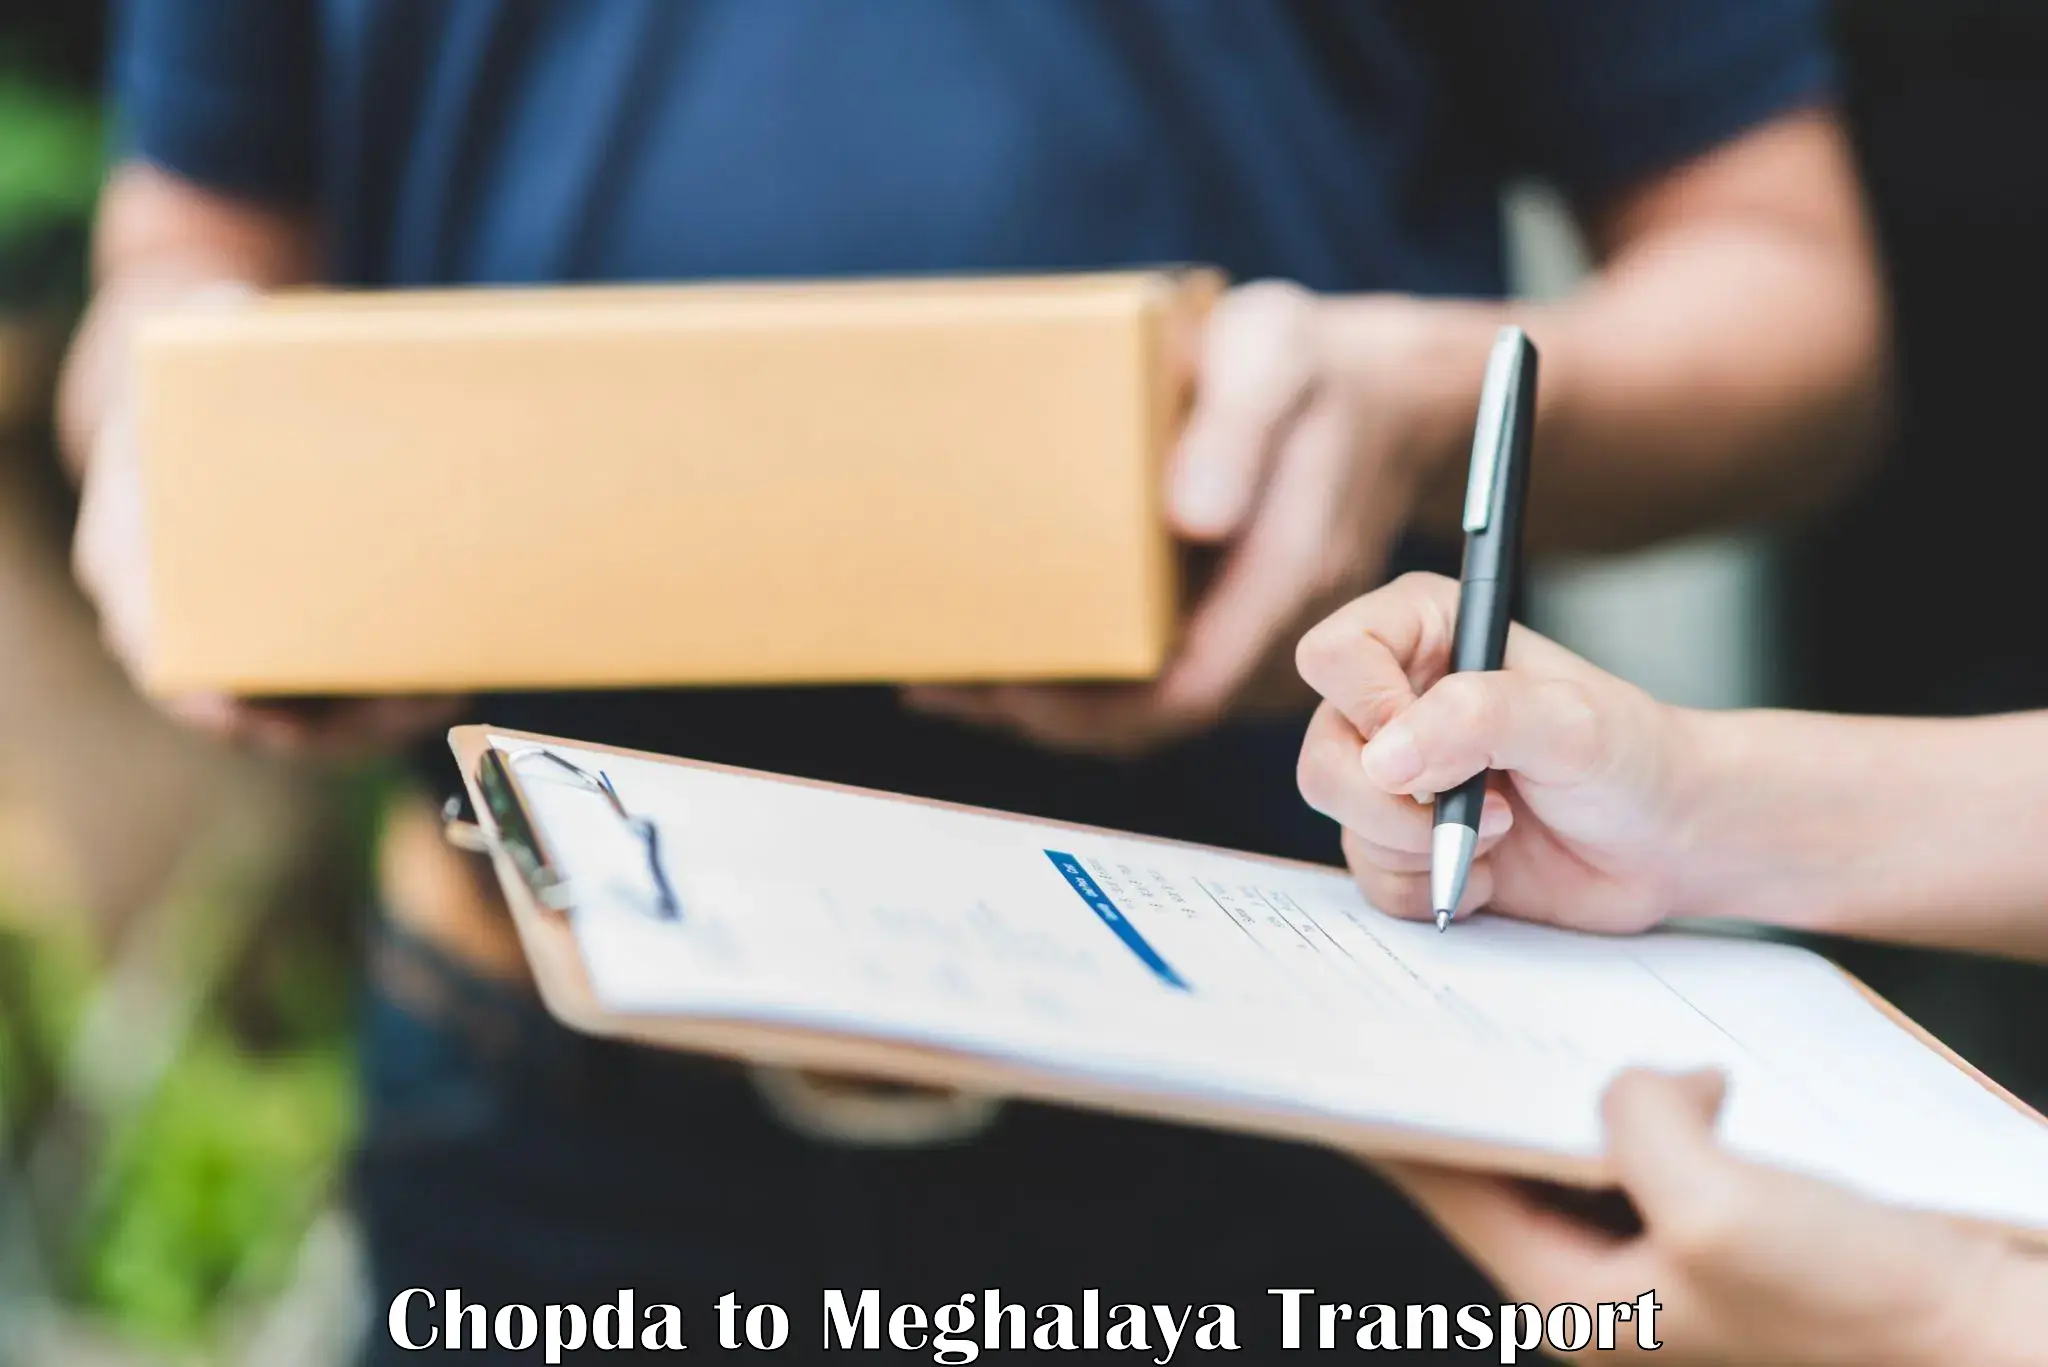 Container transport service Chopda to Meghalaya